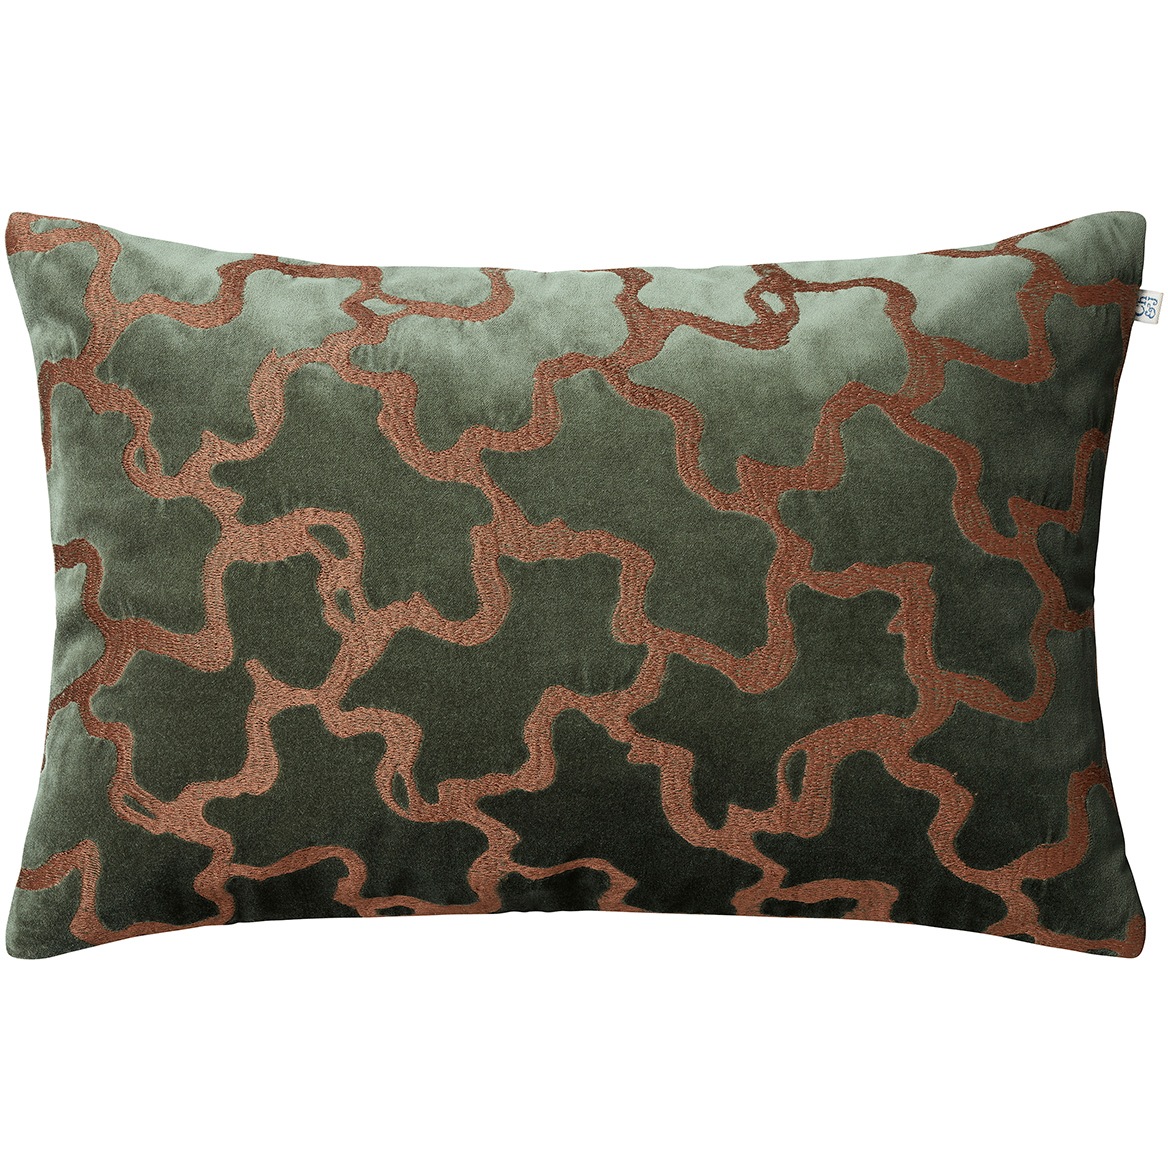 Chand Cushion Cover 40x60 cm, Forest Green / Cognac